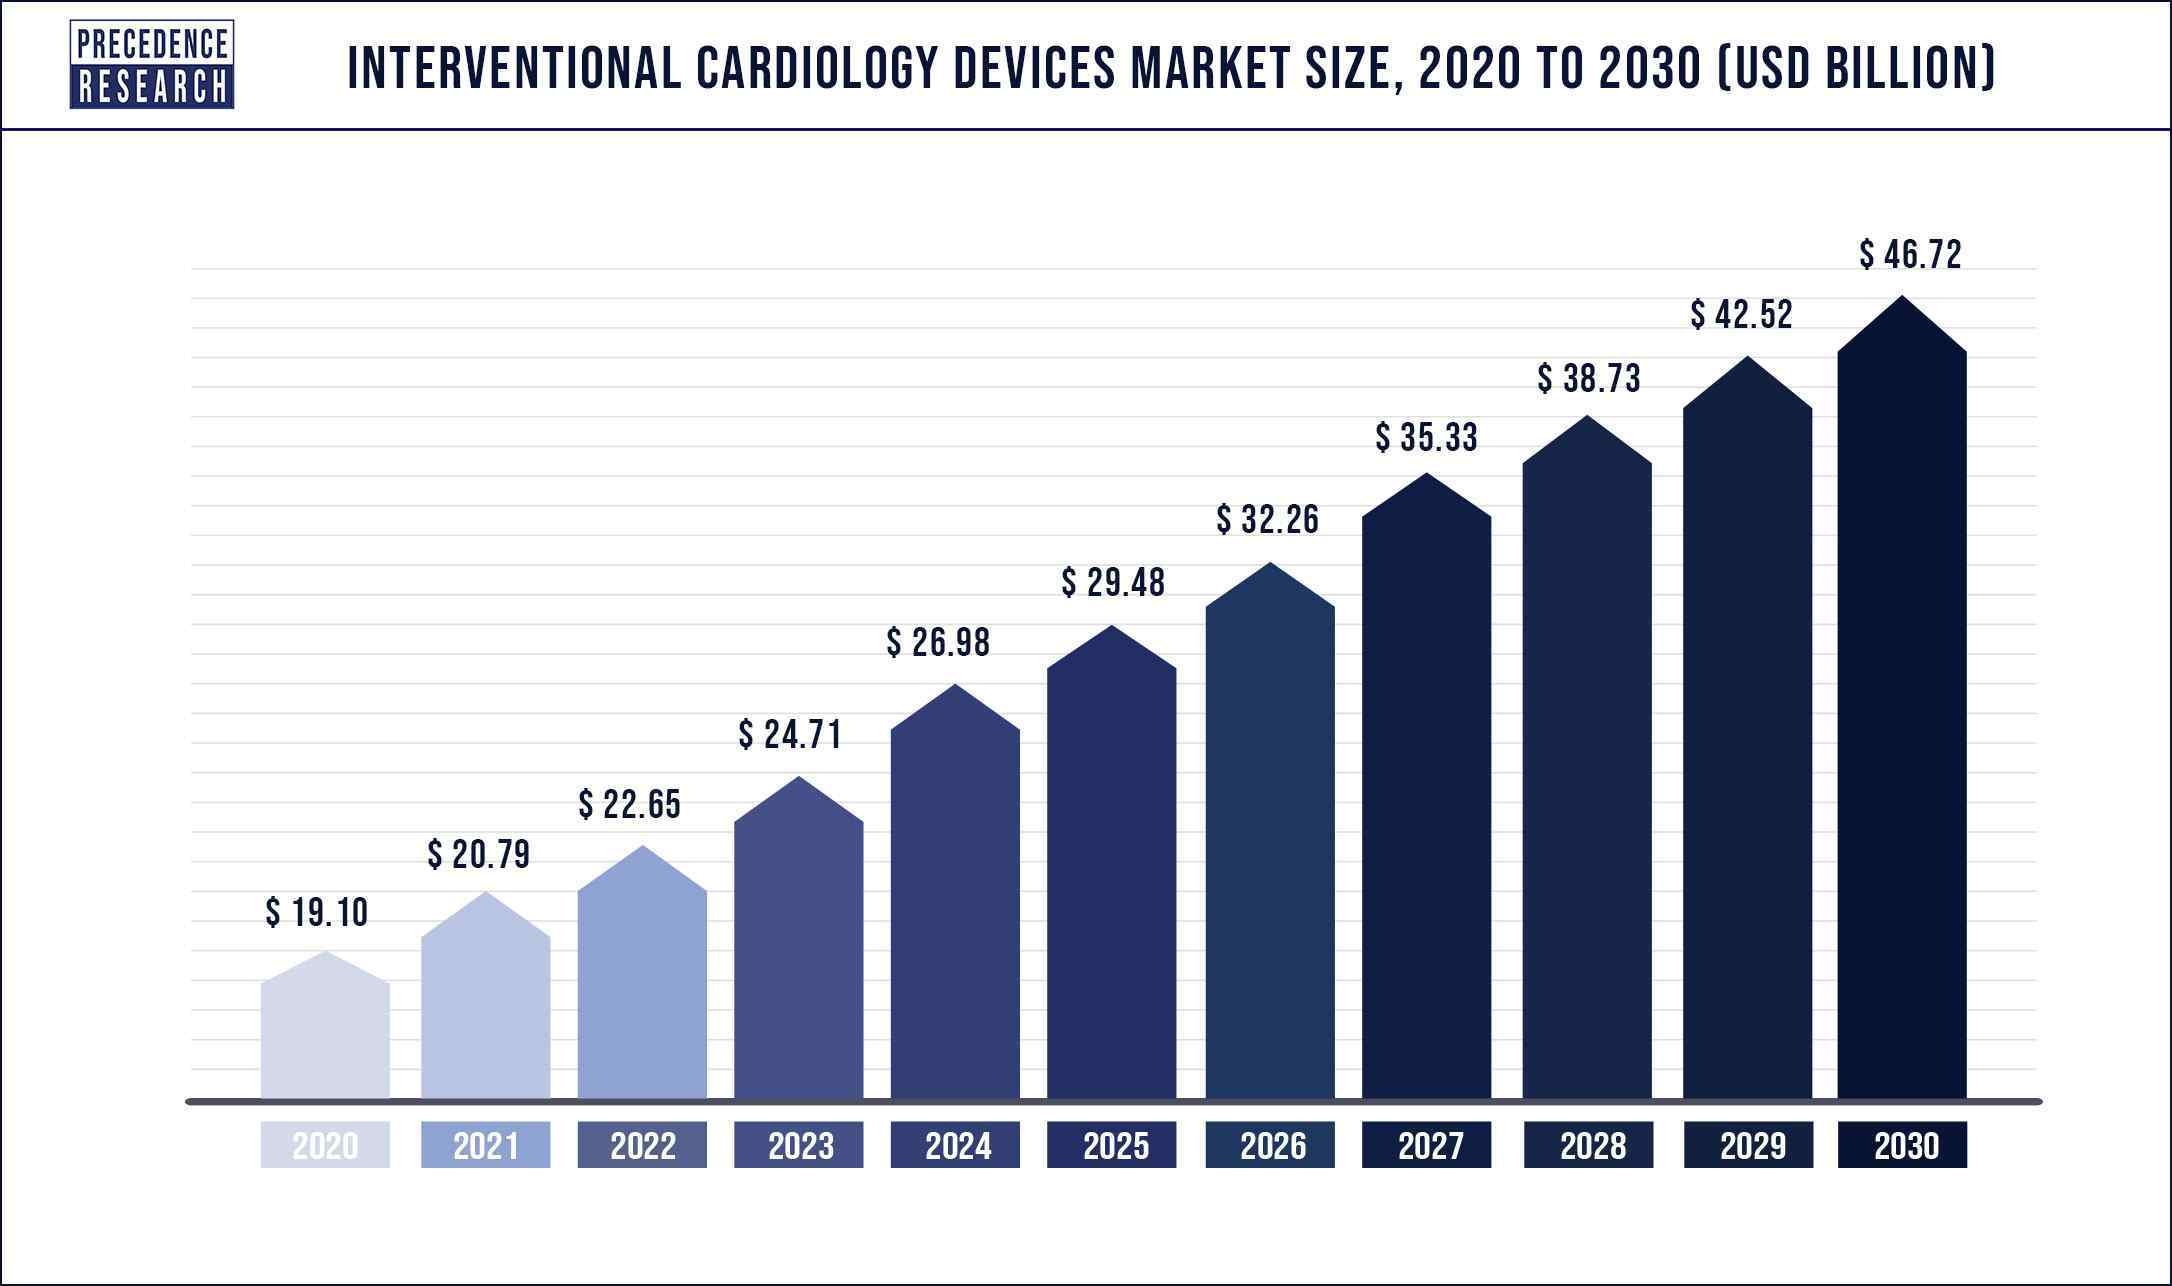 Interventional Cardiology Devices Market Size 2020 to 2030